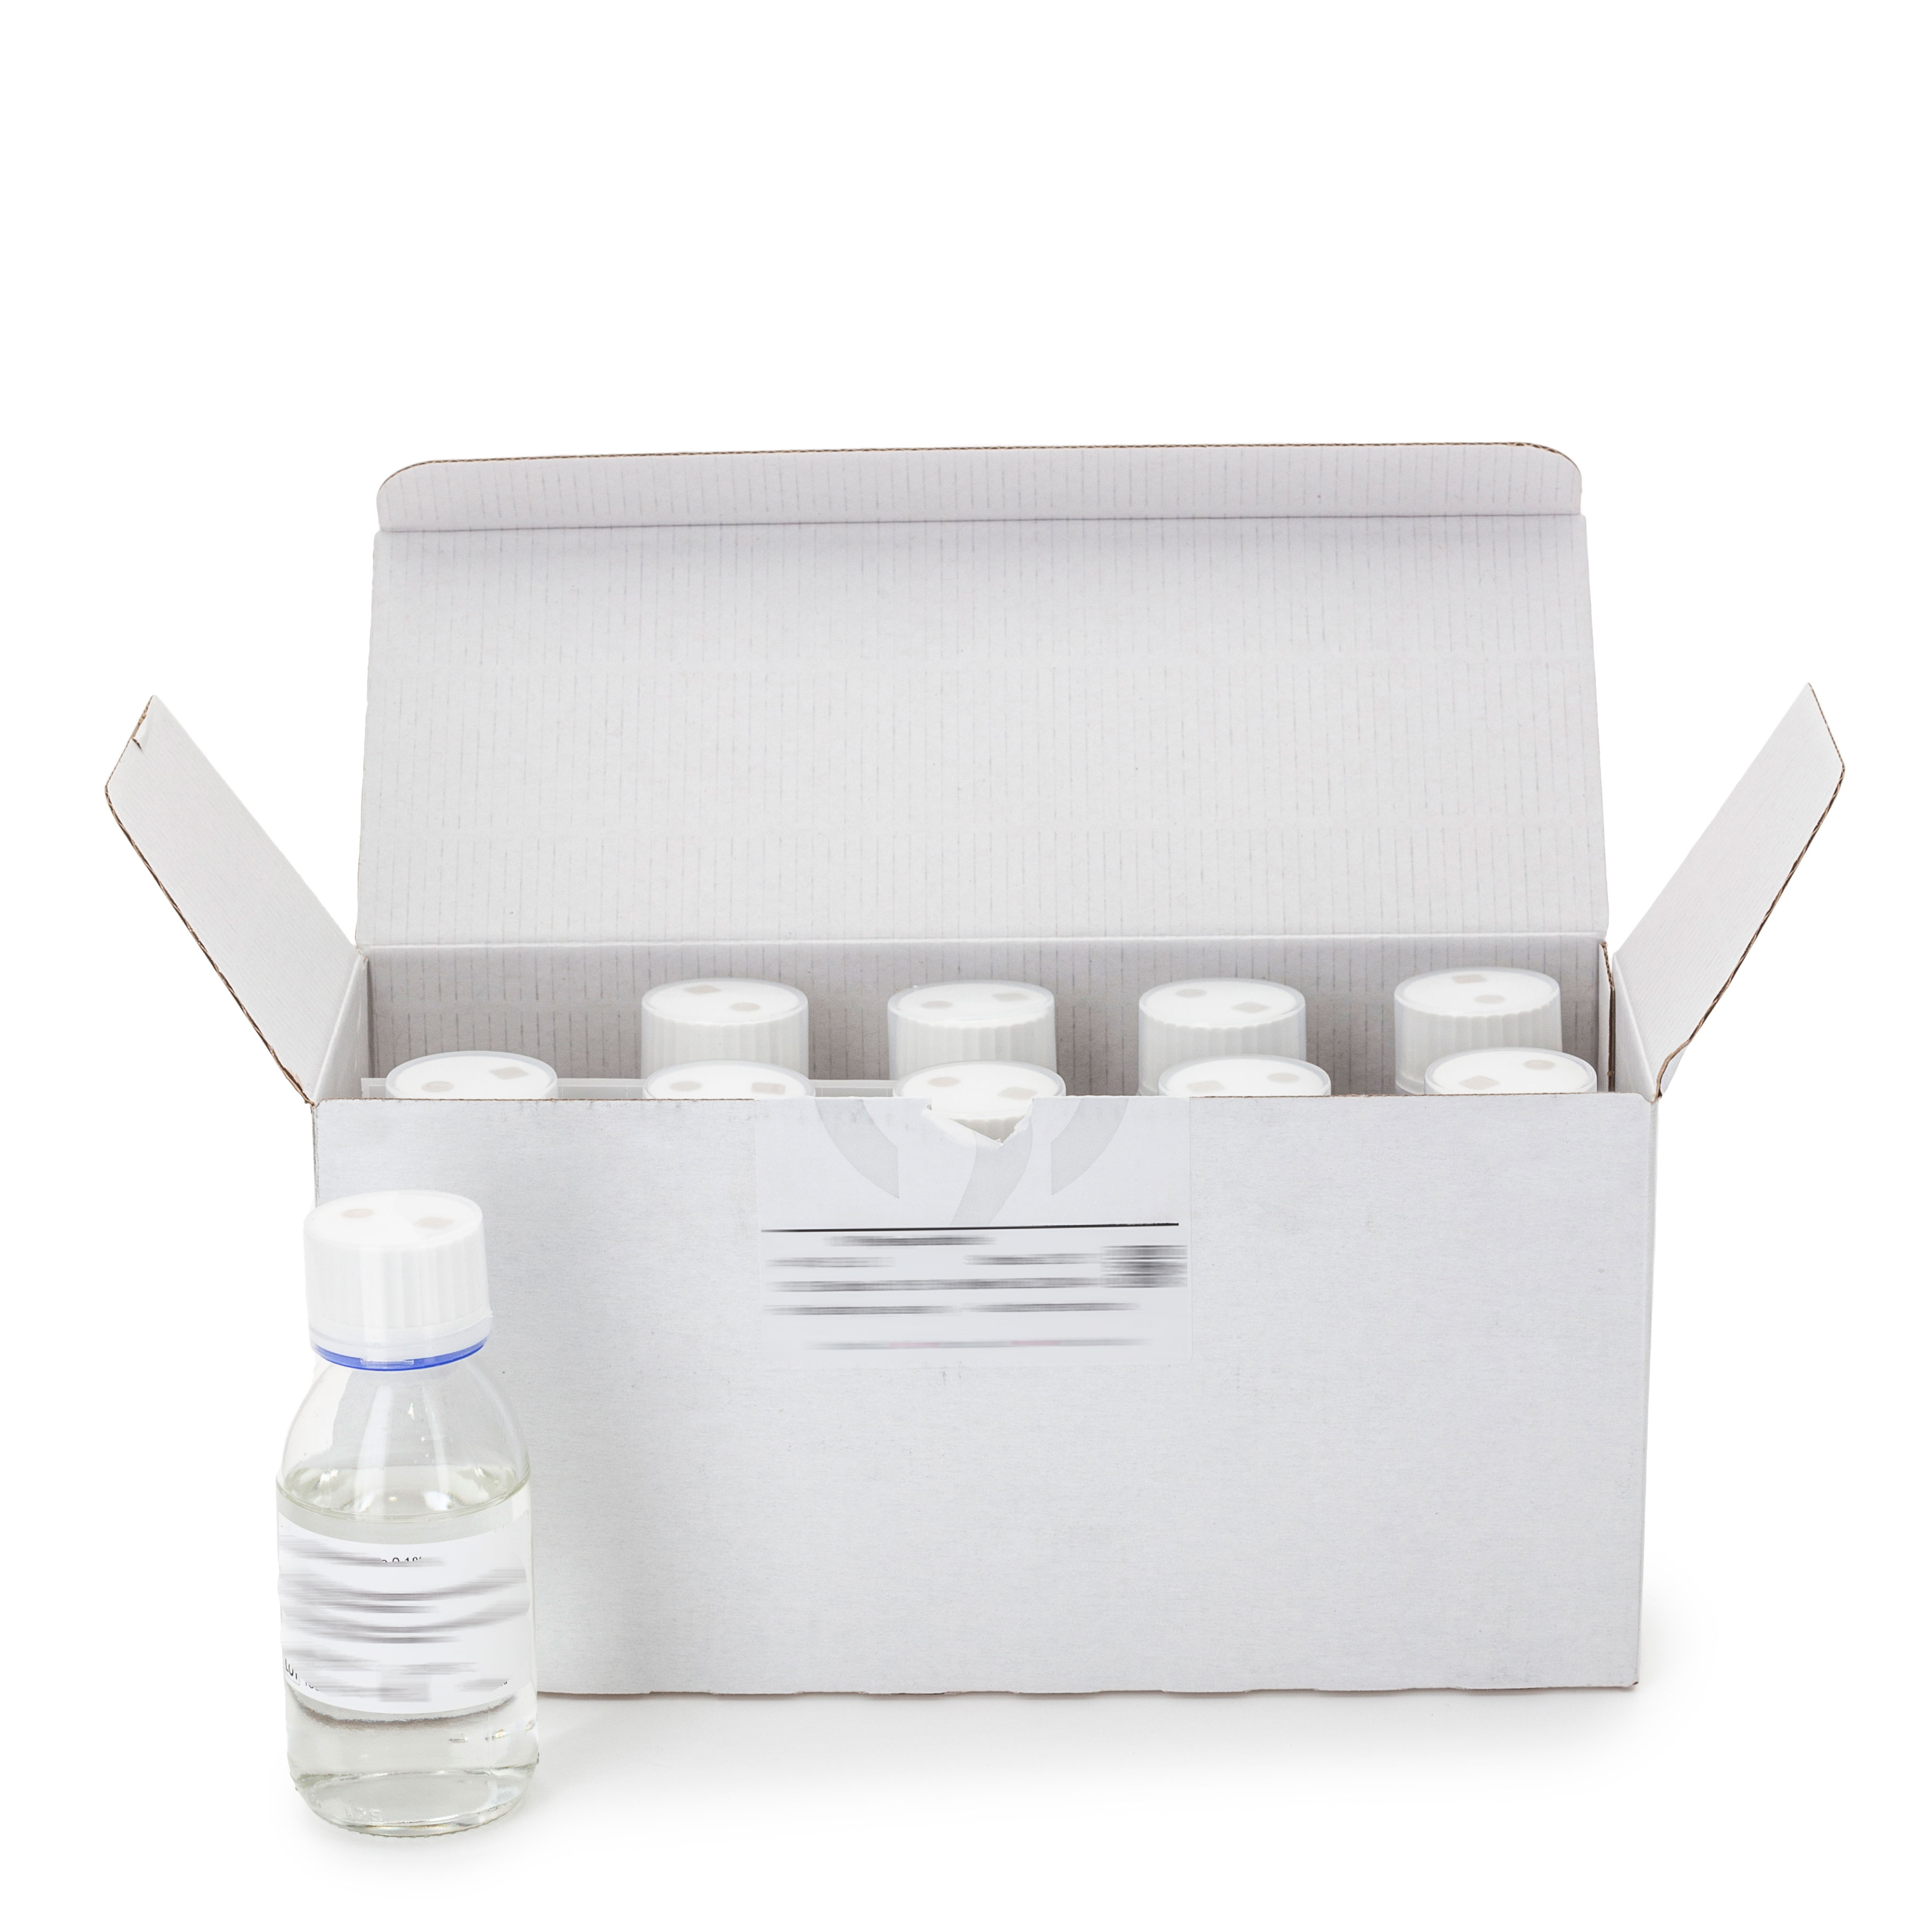 Beerens Diluent. Diluent for examination of cosmetic products with neutalizers.